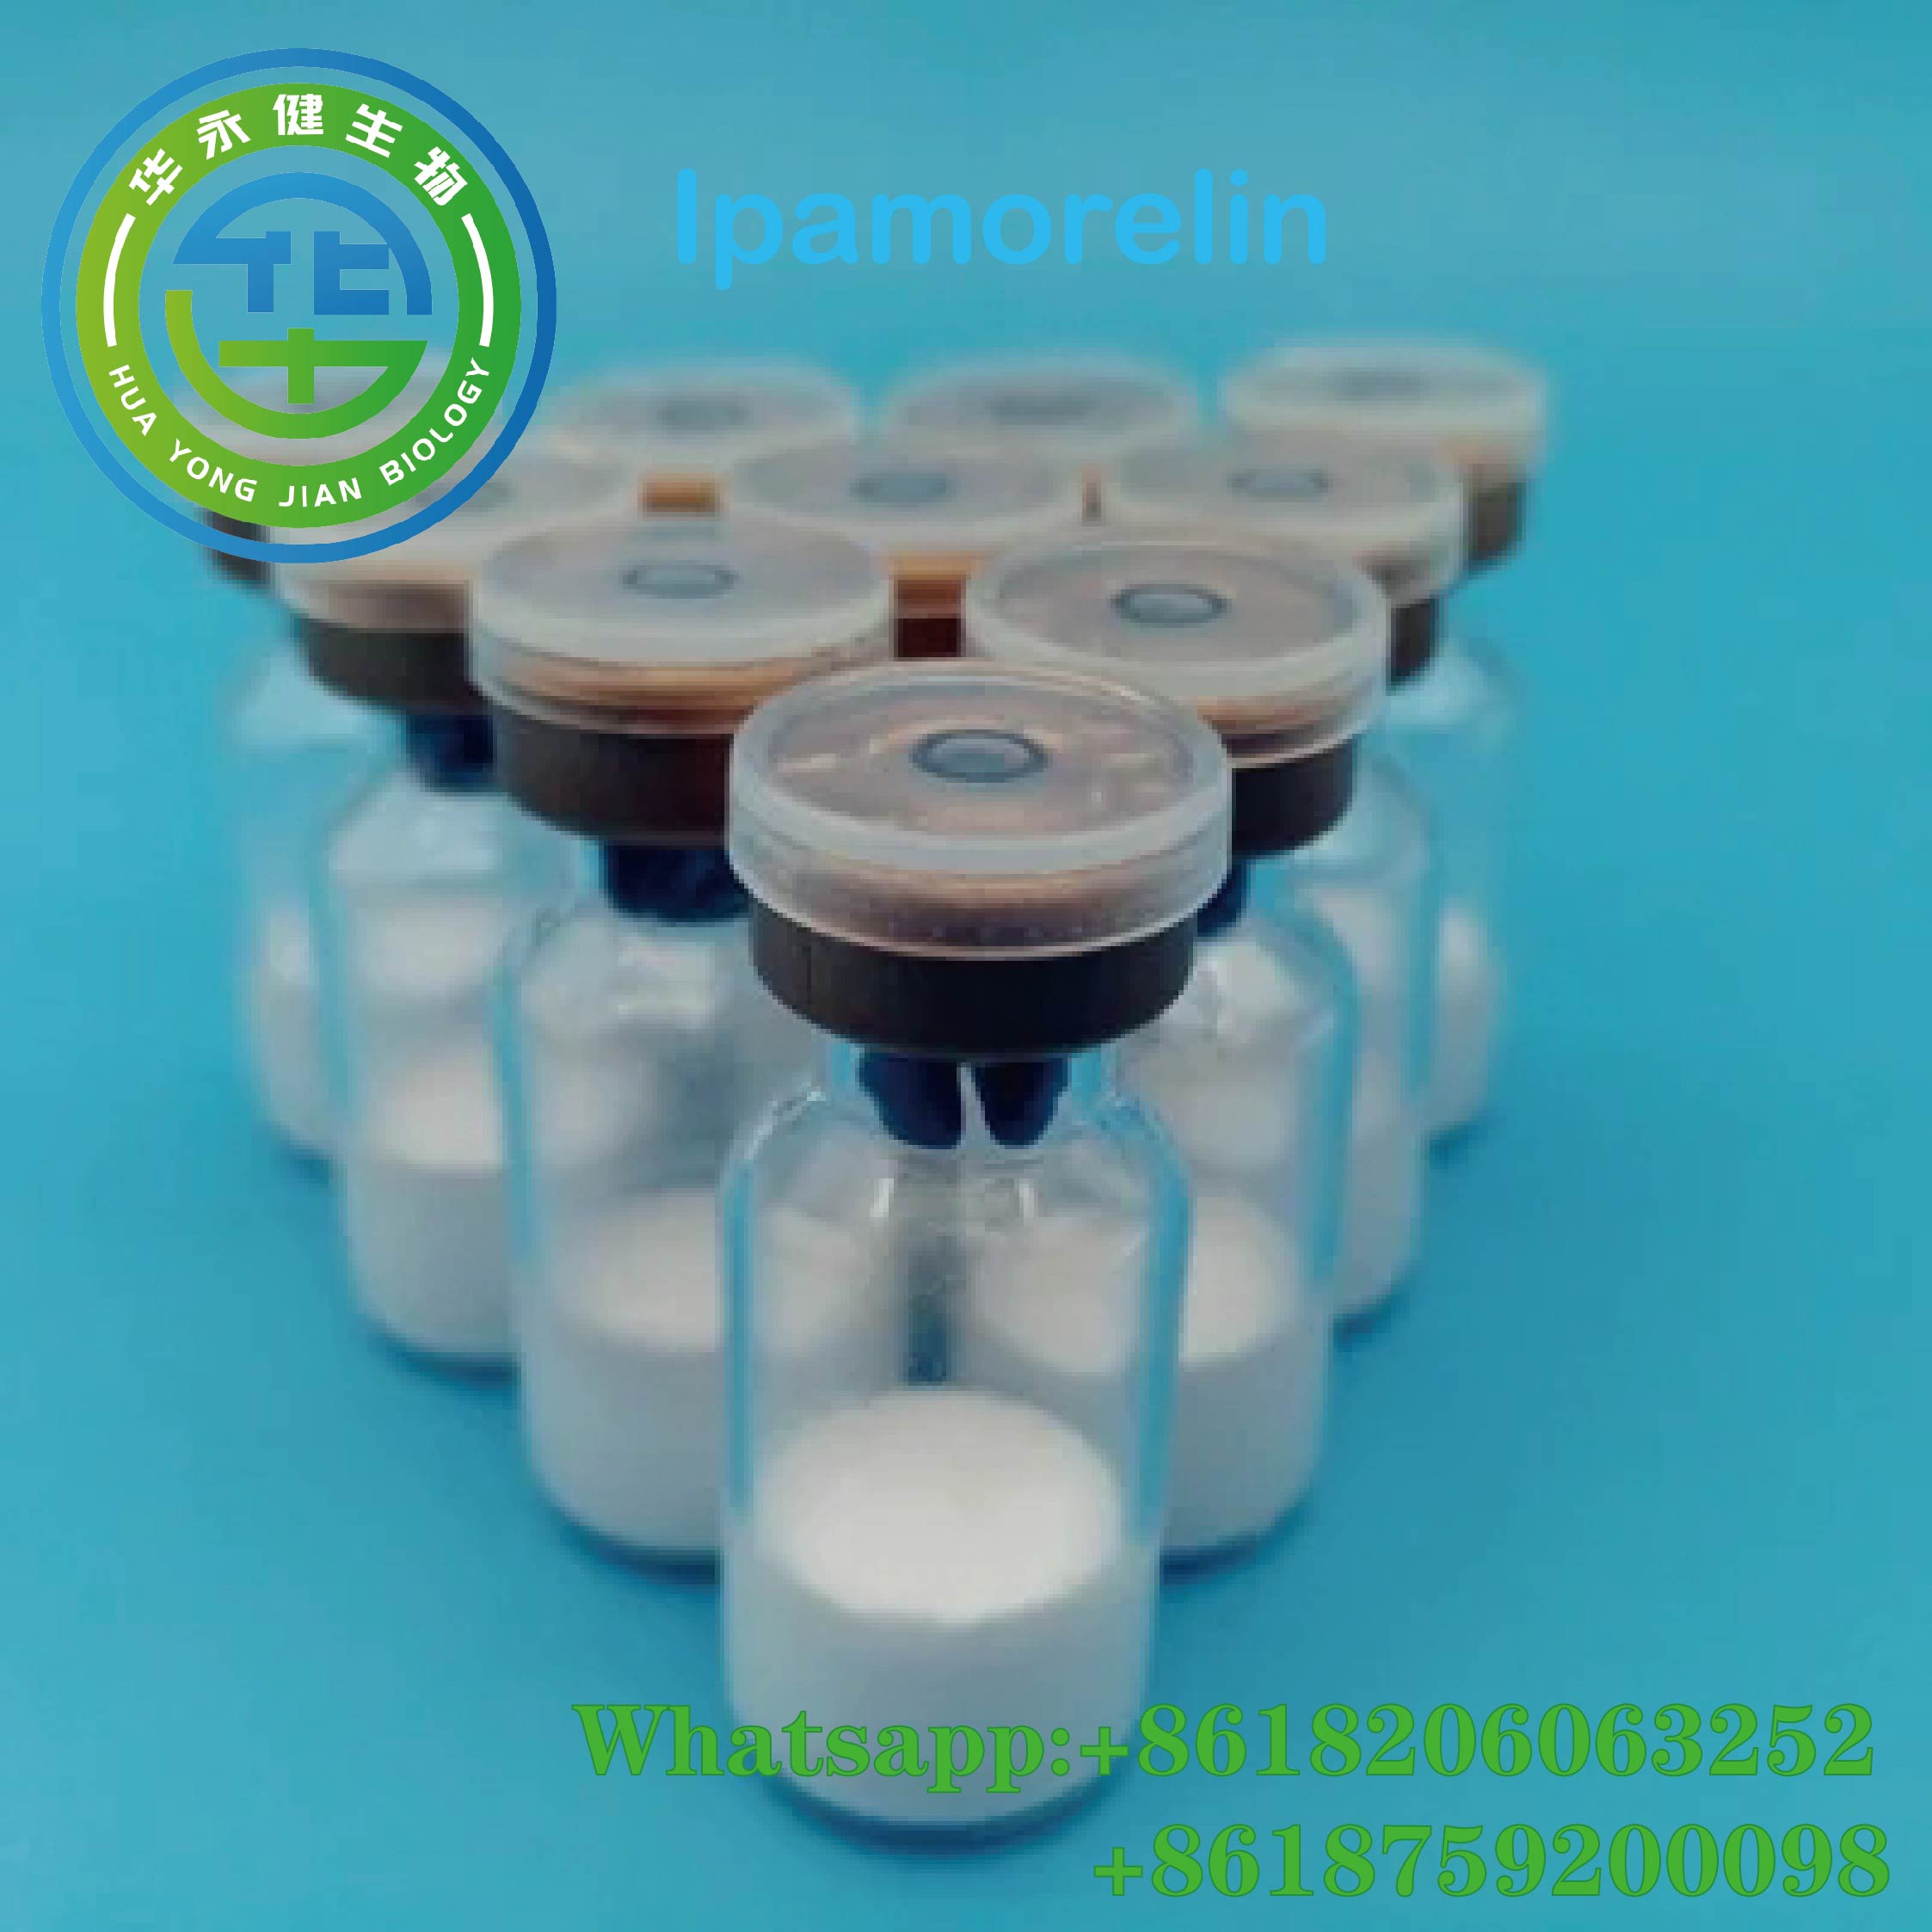 Ipamorelin Muscle Building Peptide 99% Purity Strong Effect CasNO.170851-70-4